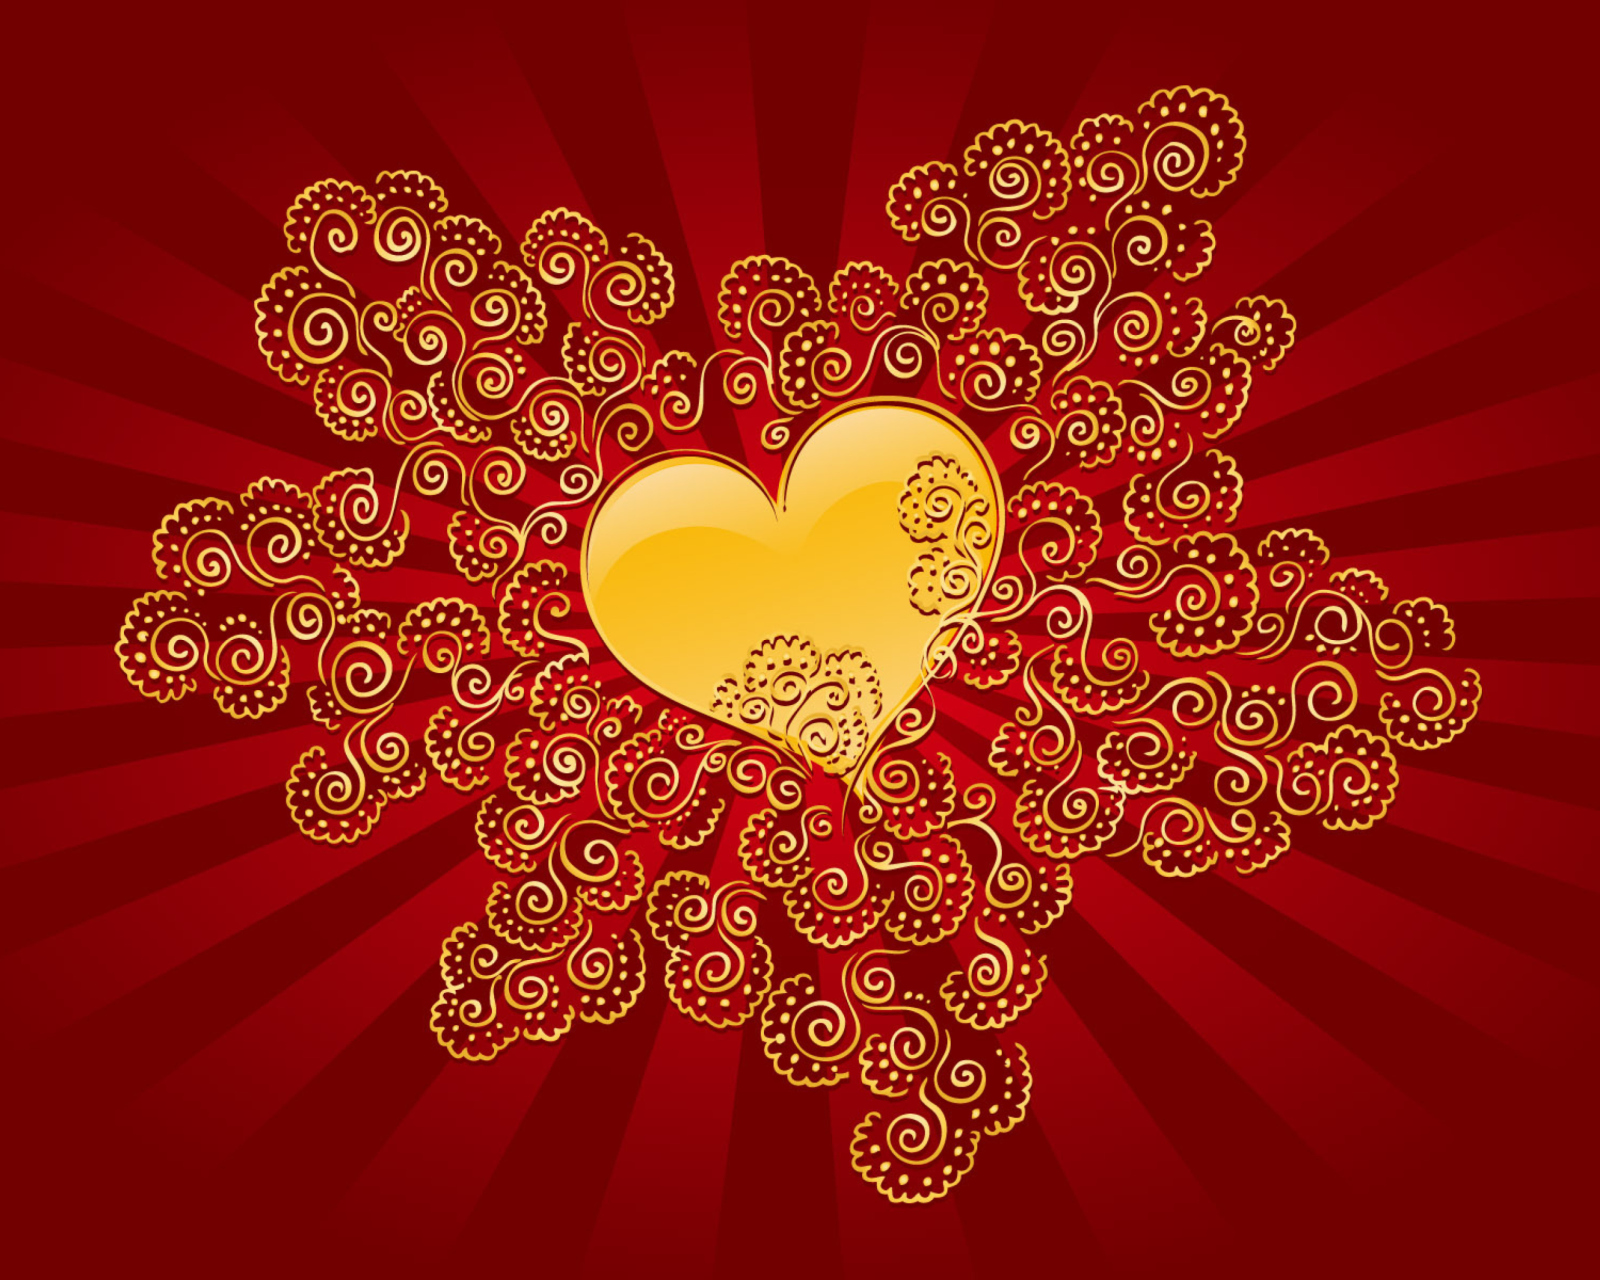 Yellow Heart On Red wallpaper 1600x1280